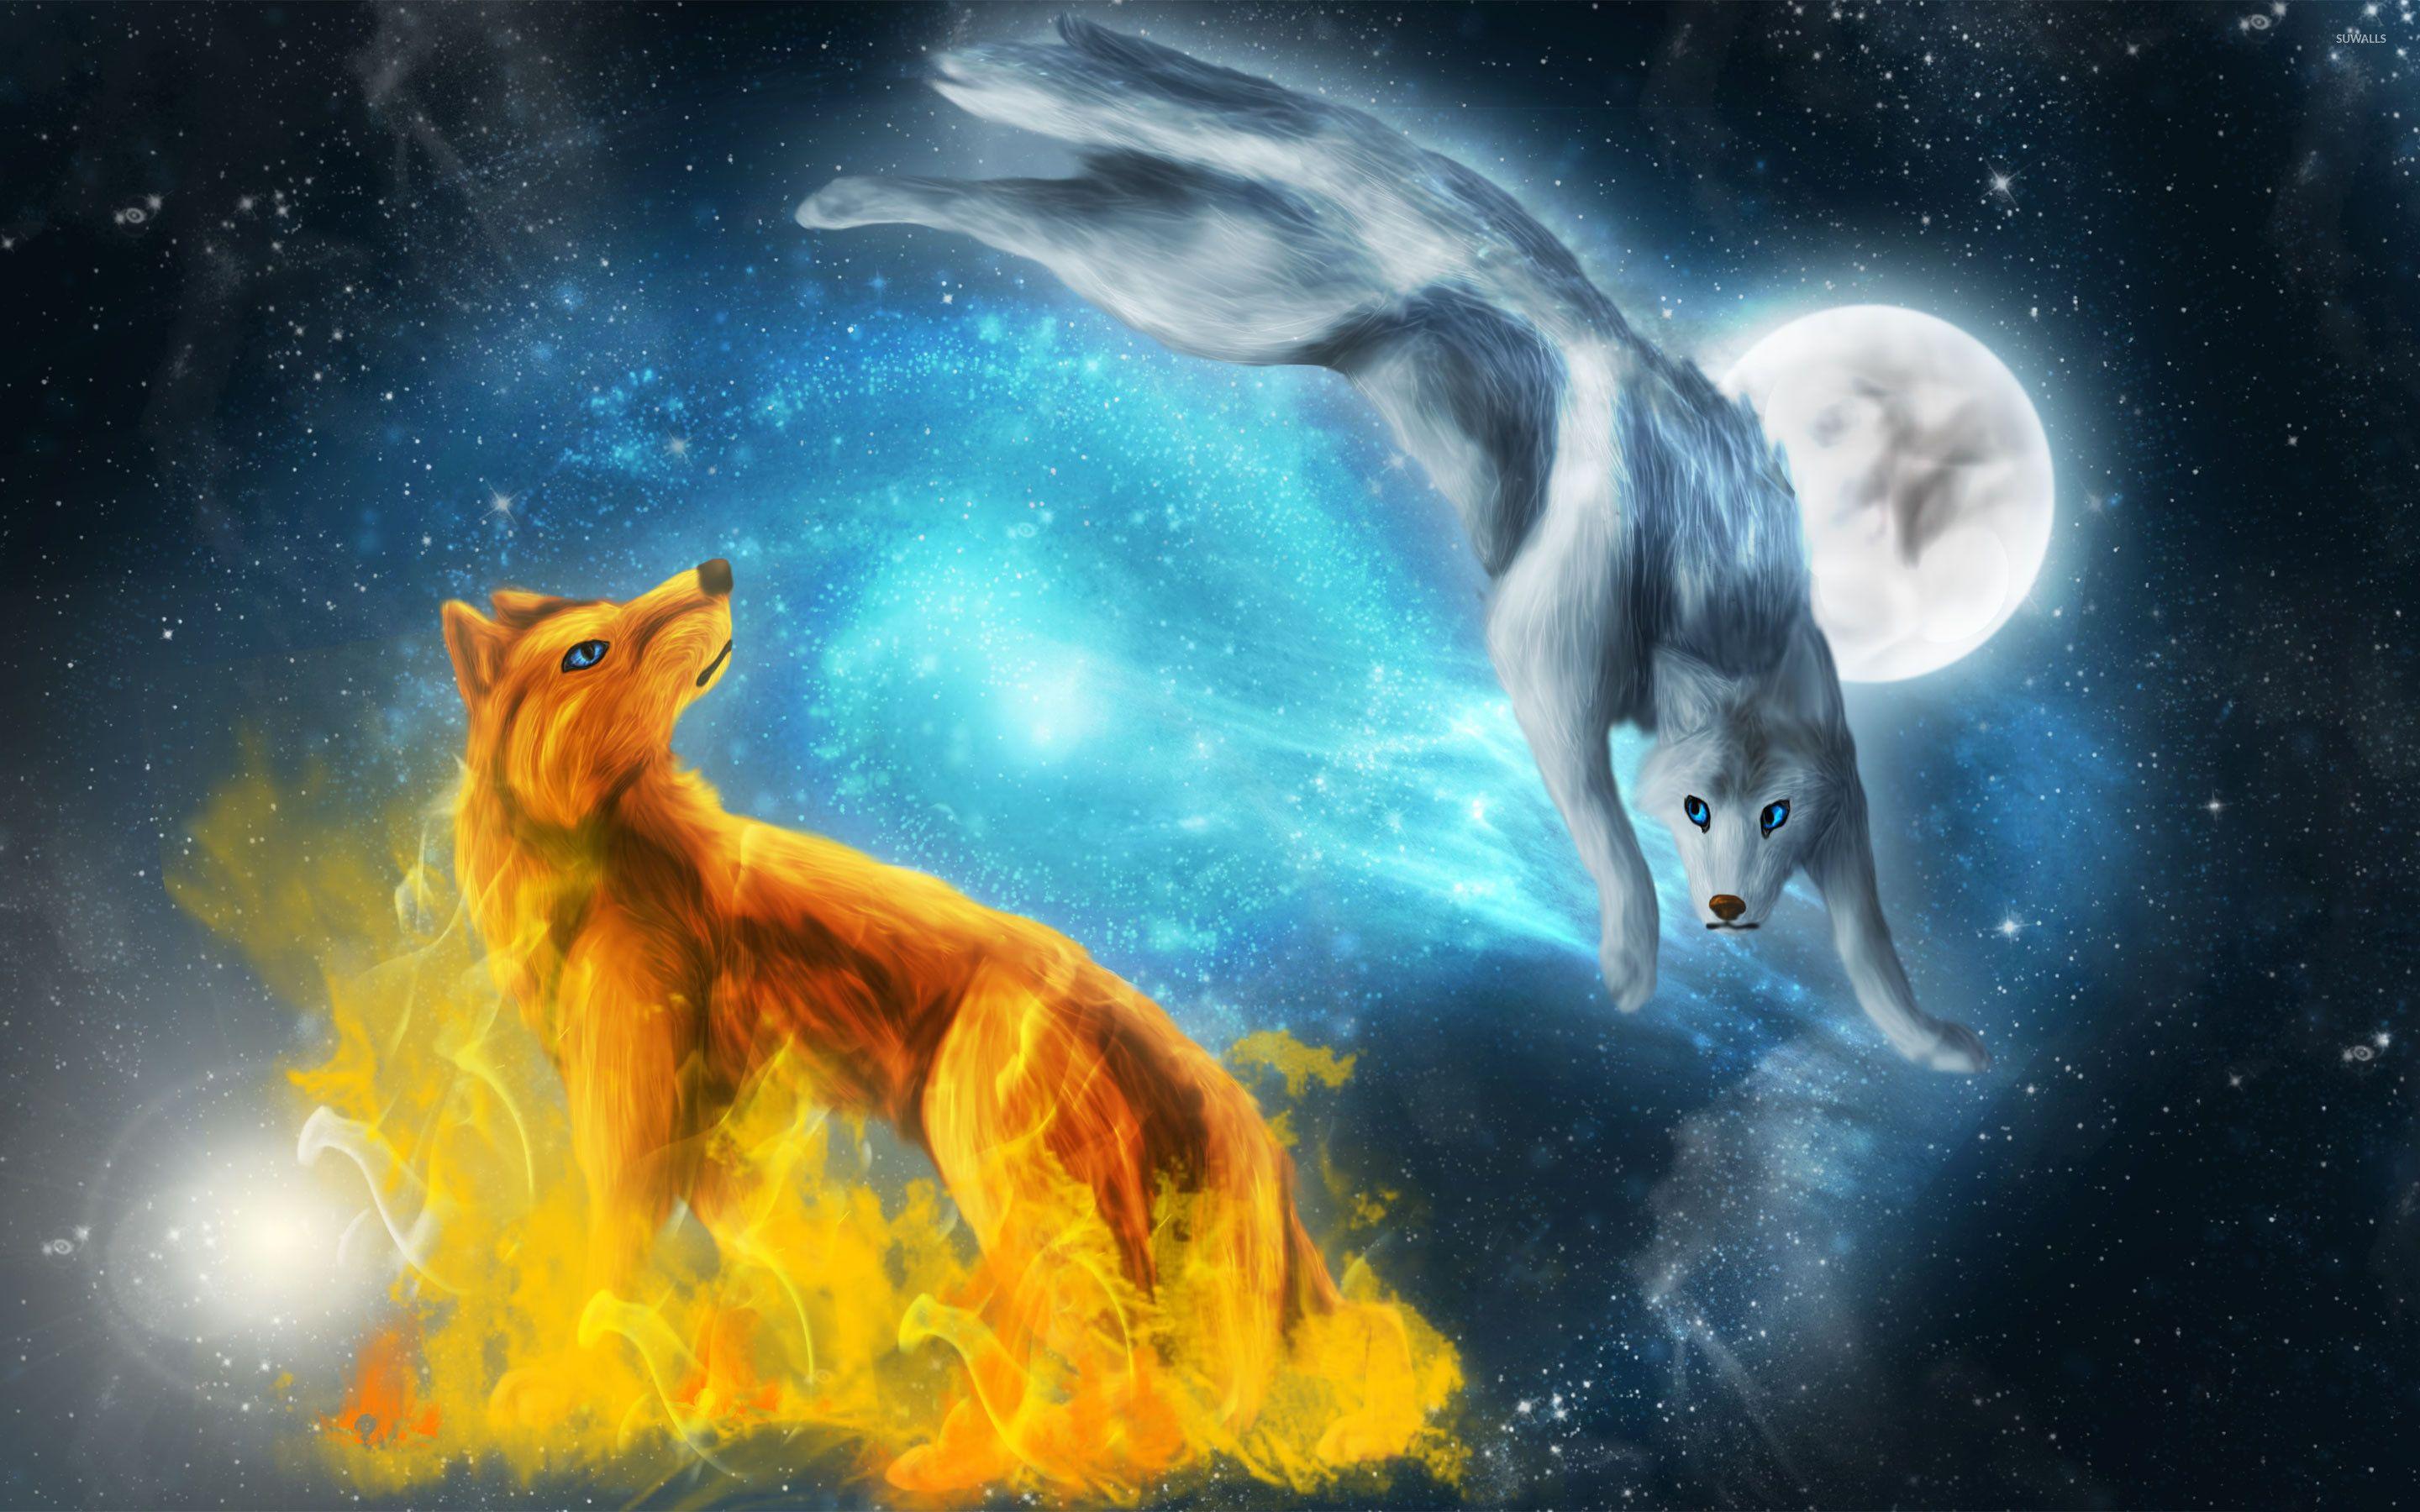 Illuminated Spirits of Werewolves  The Old Ones  The Immortal Chronicles  Wiki  Fandom